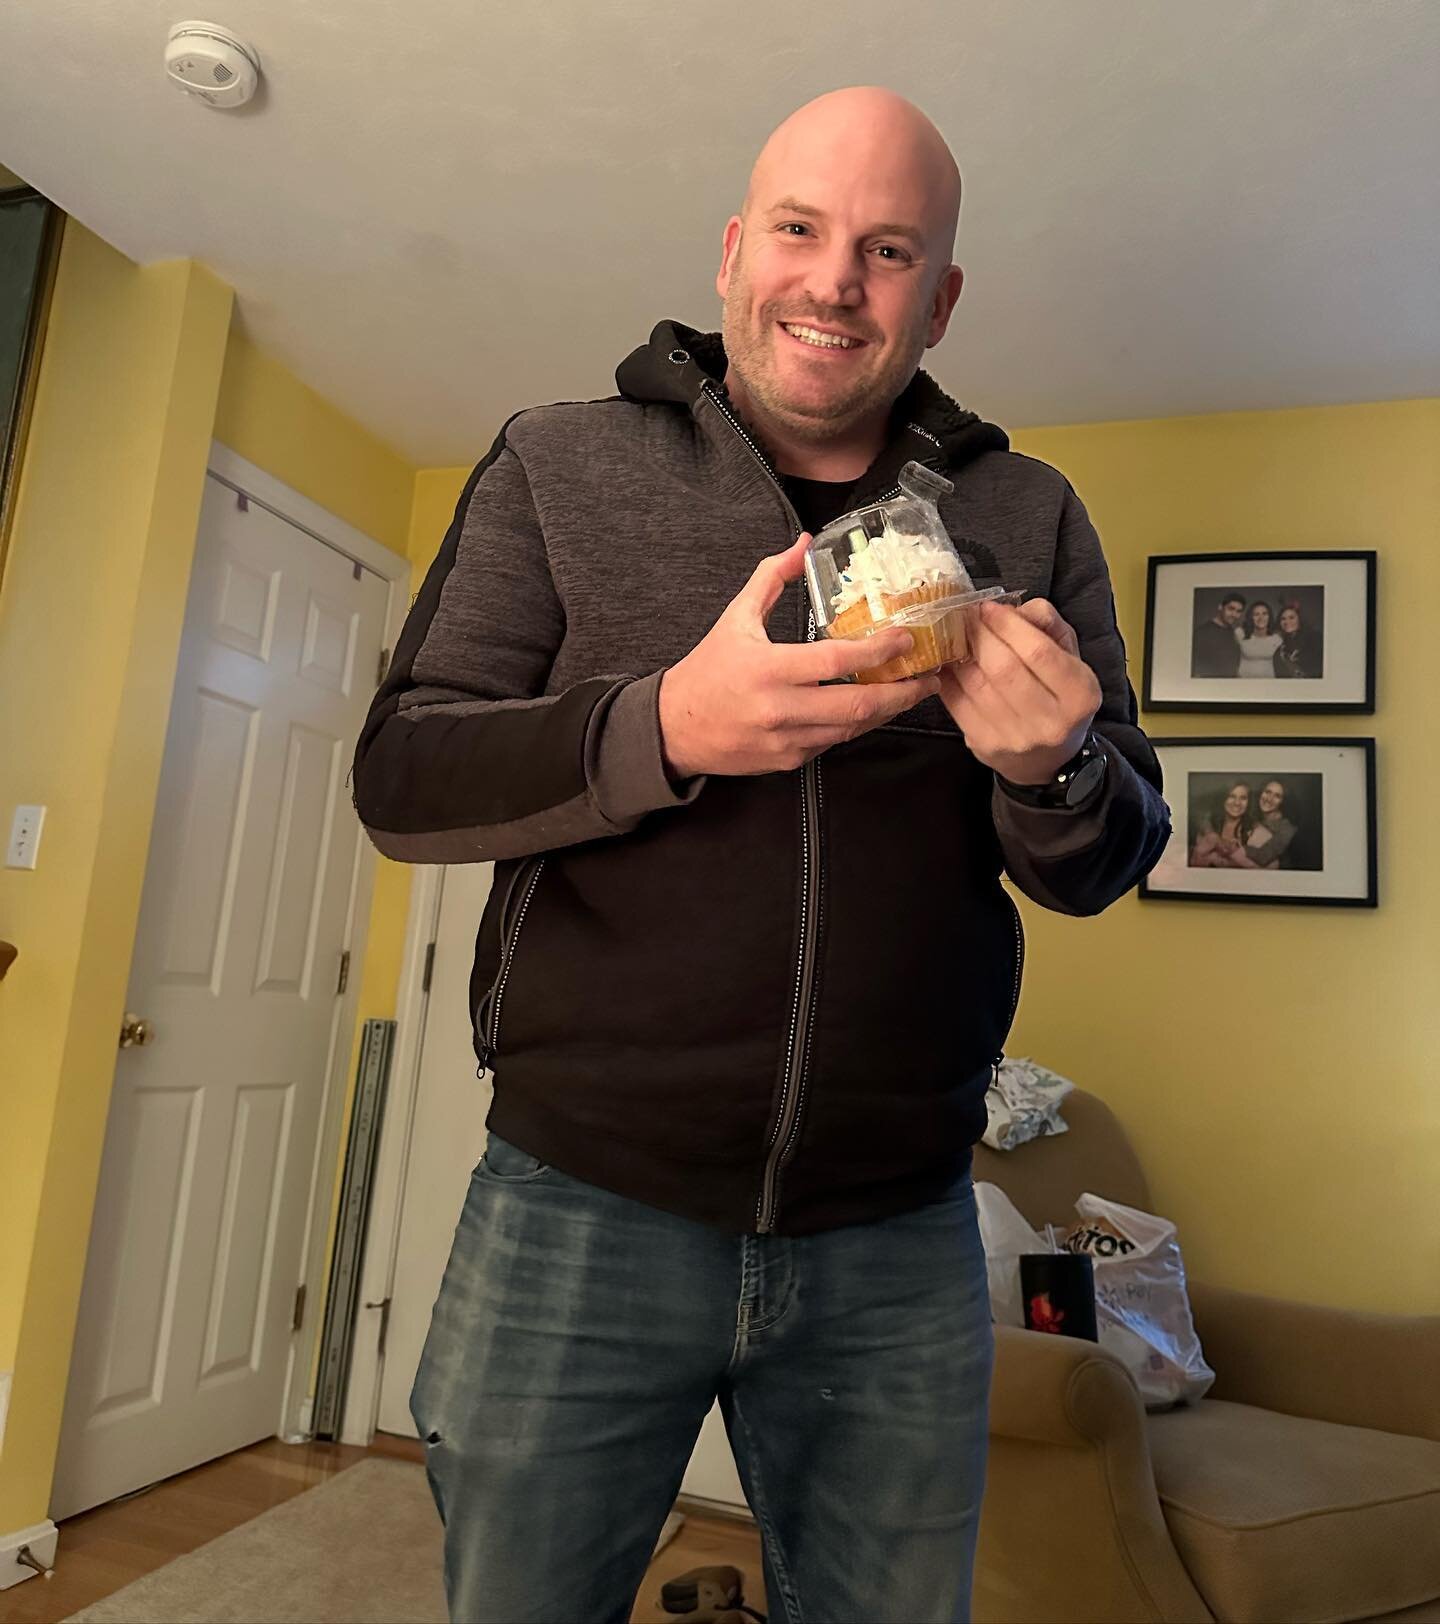 This first photo is of my amazing, smiley, handsome other half Chris, coming home from work today surprising me with a cupcake on this special day that I hold dear in my heart. The second photo, is WHY I hold this day close to my heart. It was me exa